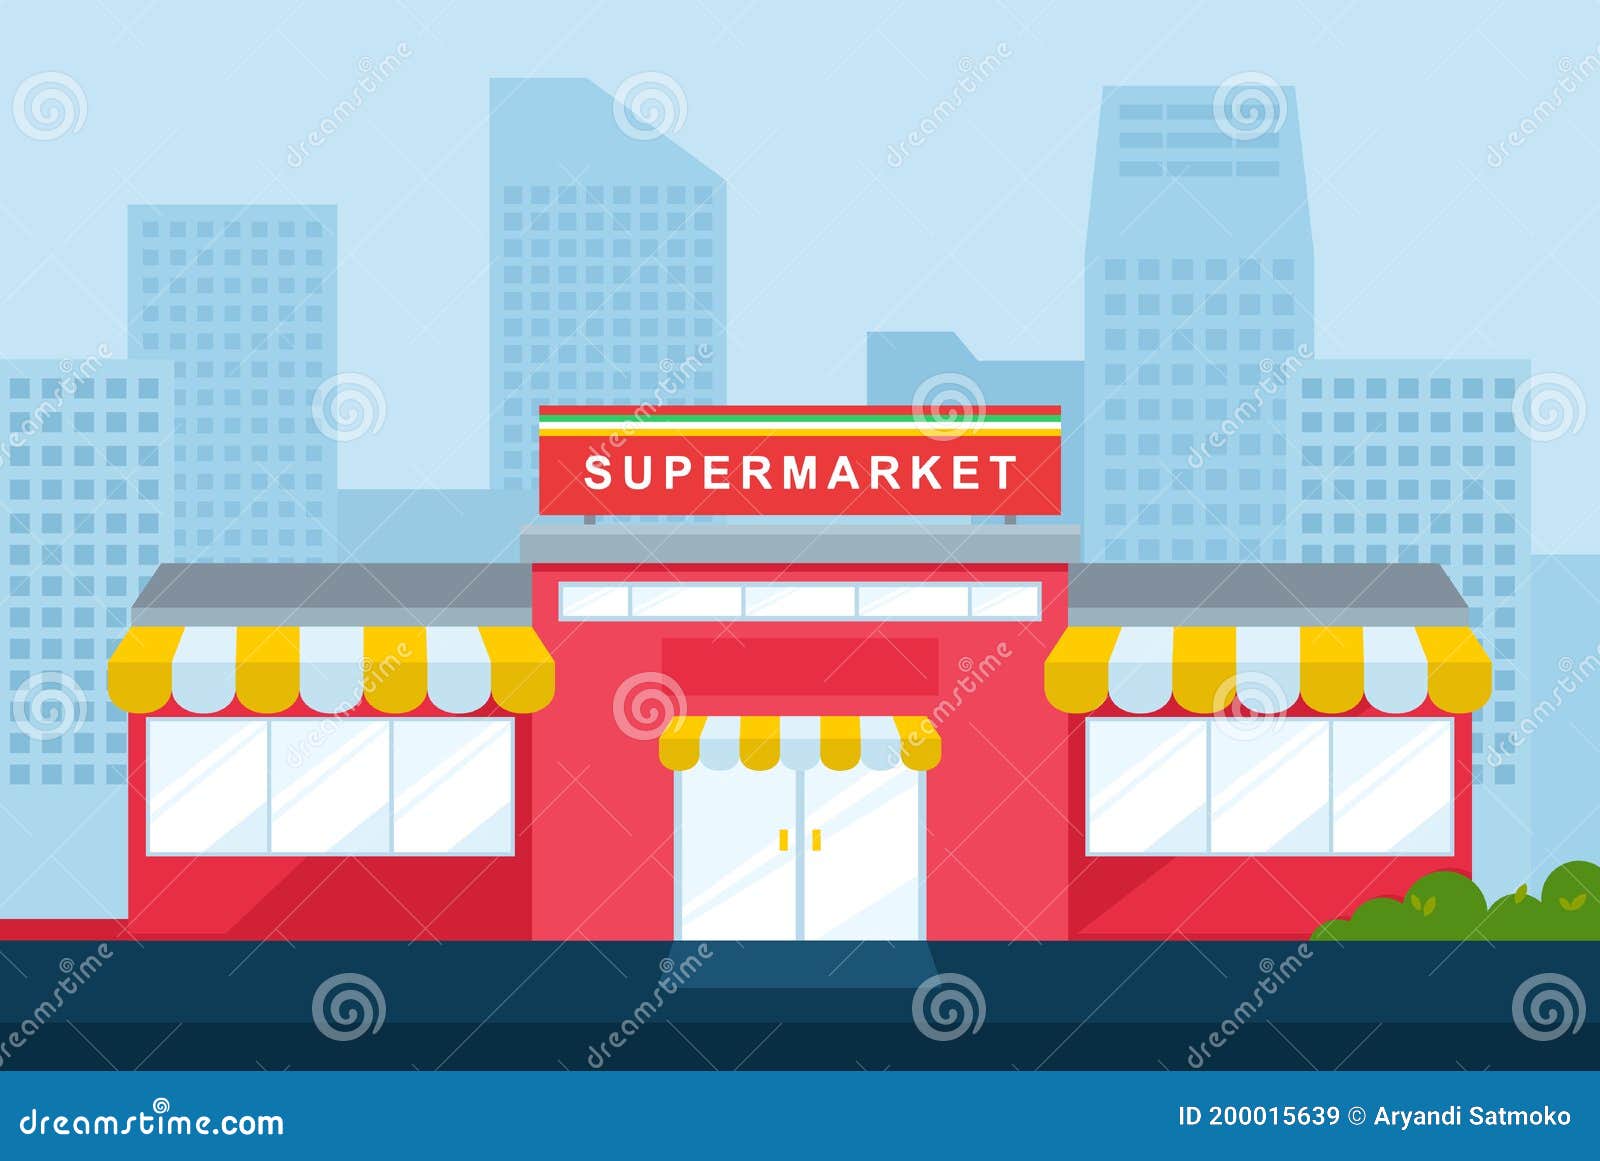 Illustration of Marketplace Store Buildings. Shop and Trade Business  Building from the Front View Stock Illustration - Illustration of  application, banner: 200015639